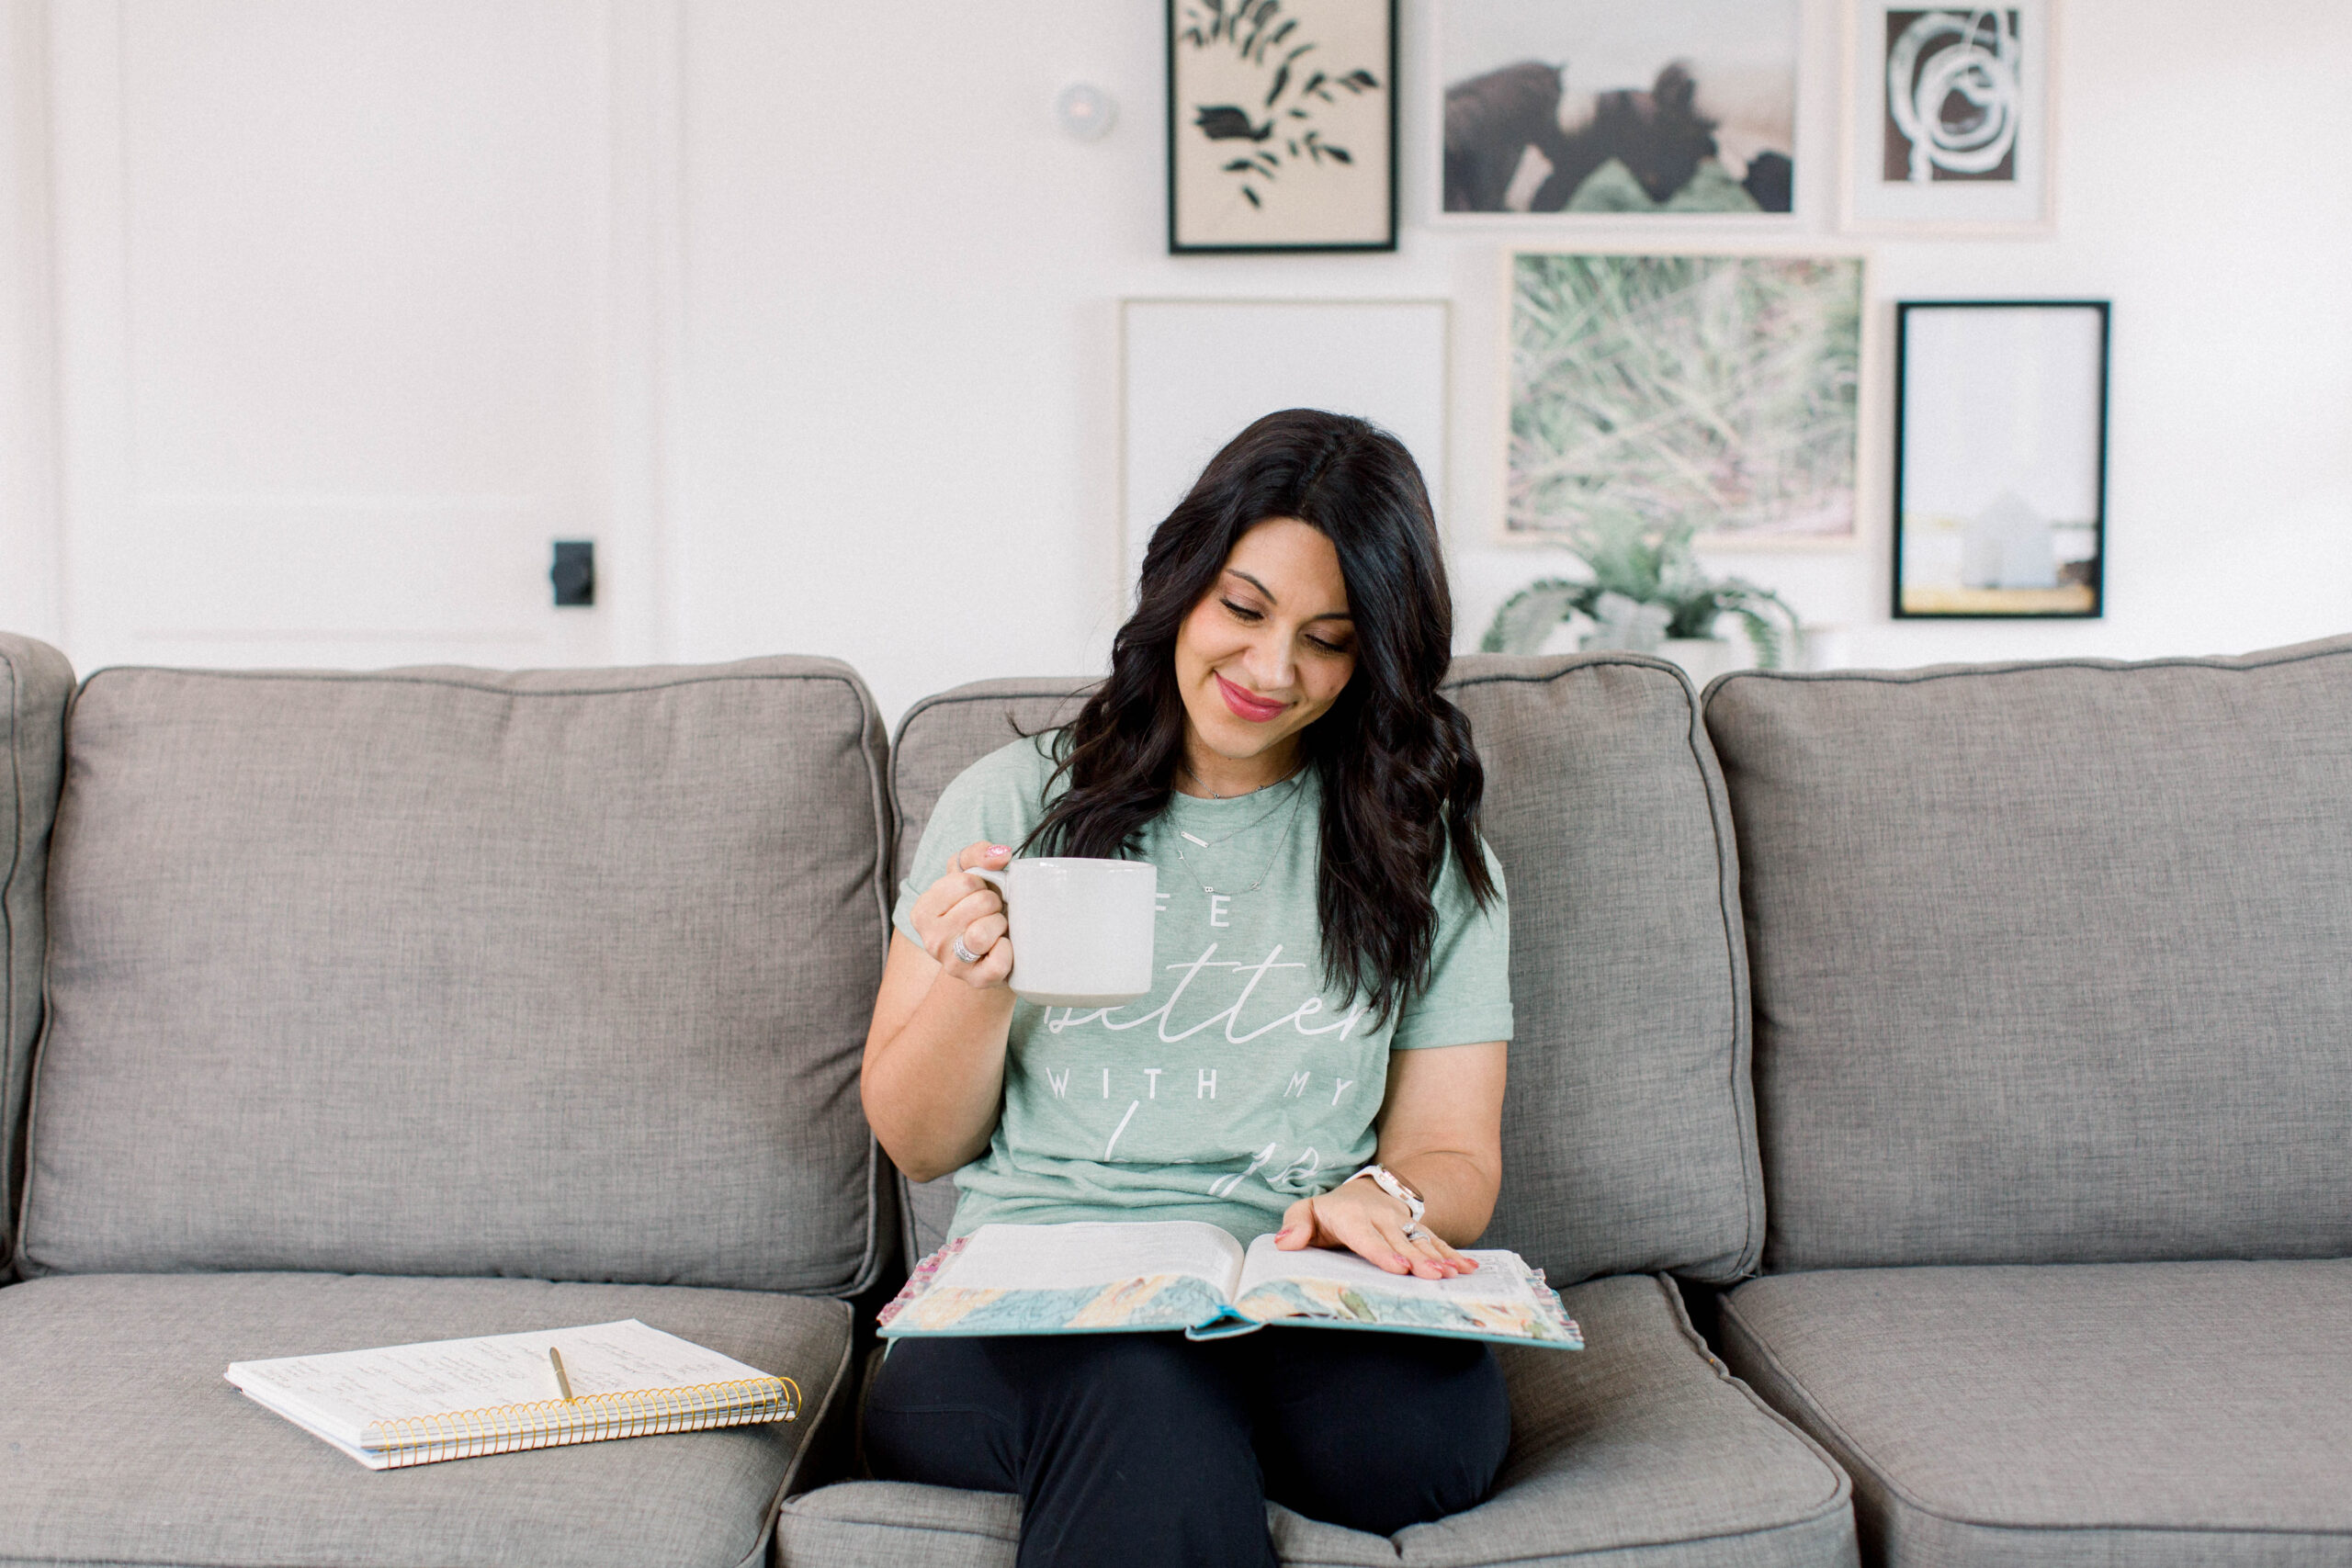 dark haired woman sitting on sofa reading a bible and drinking coffee